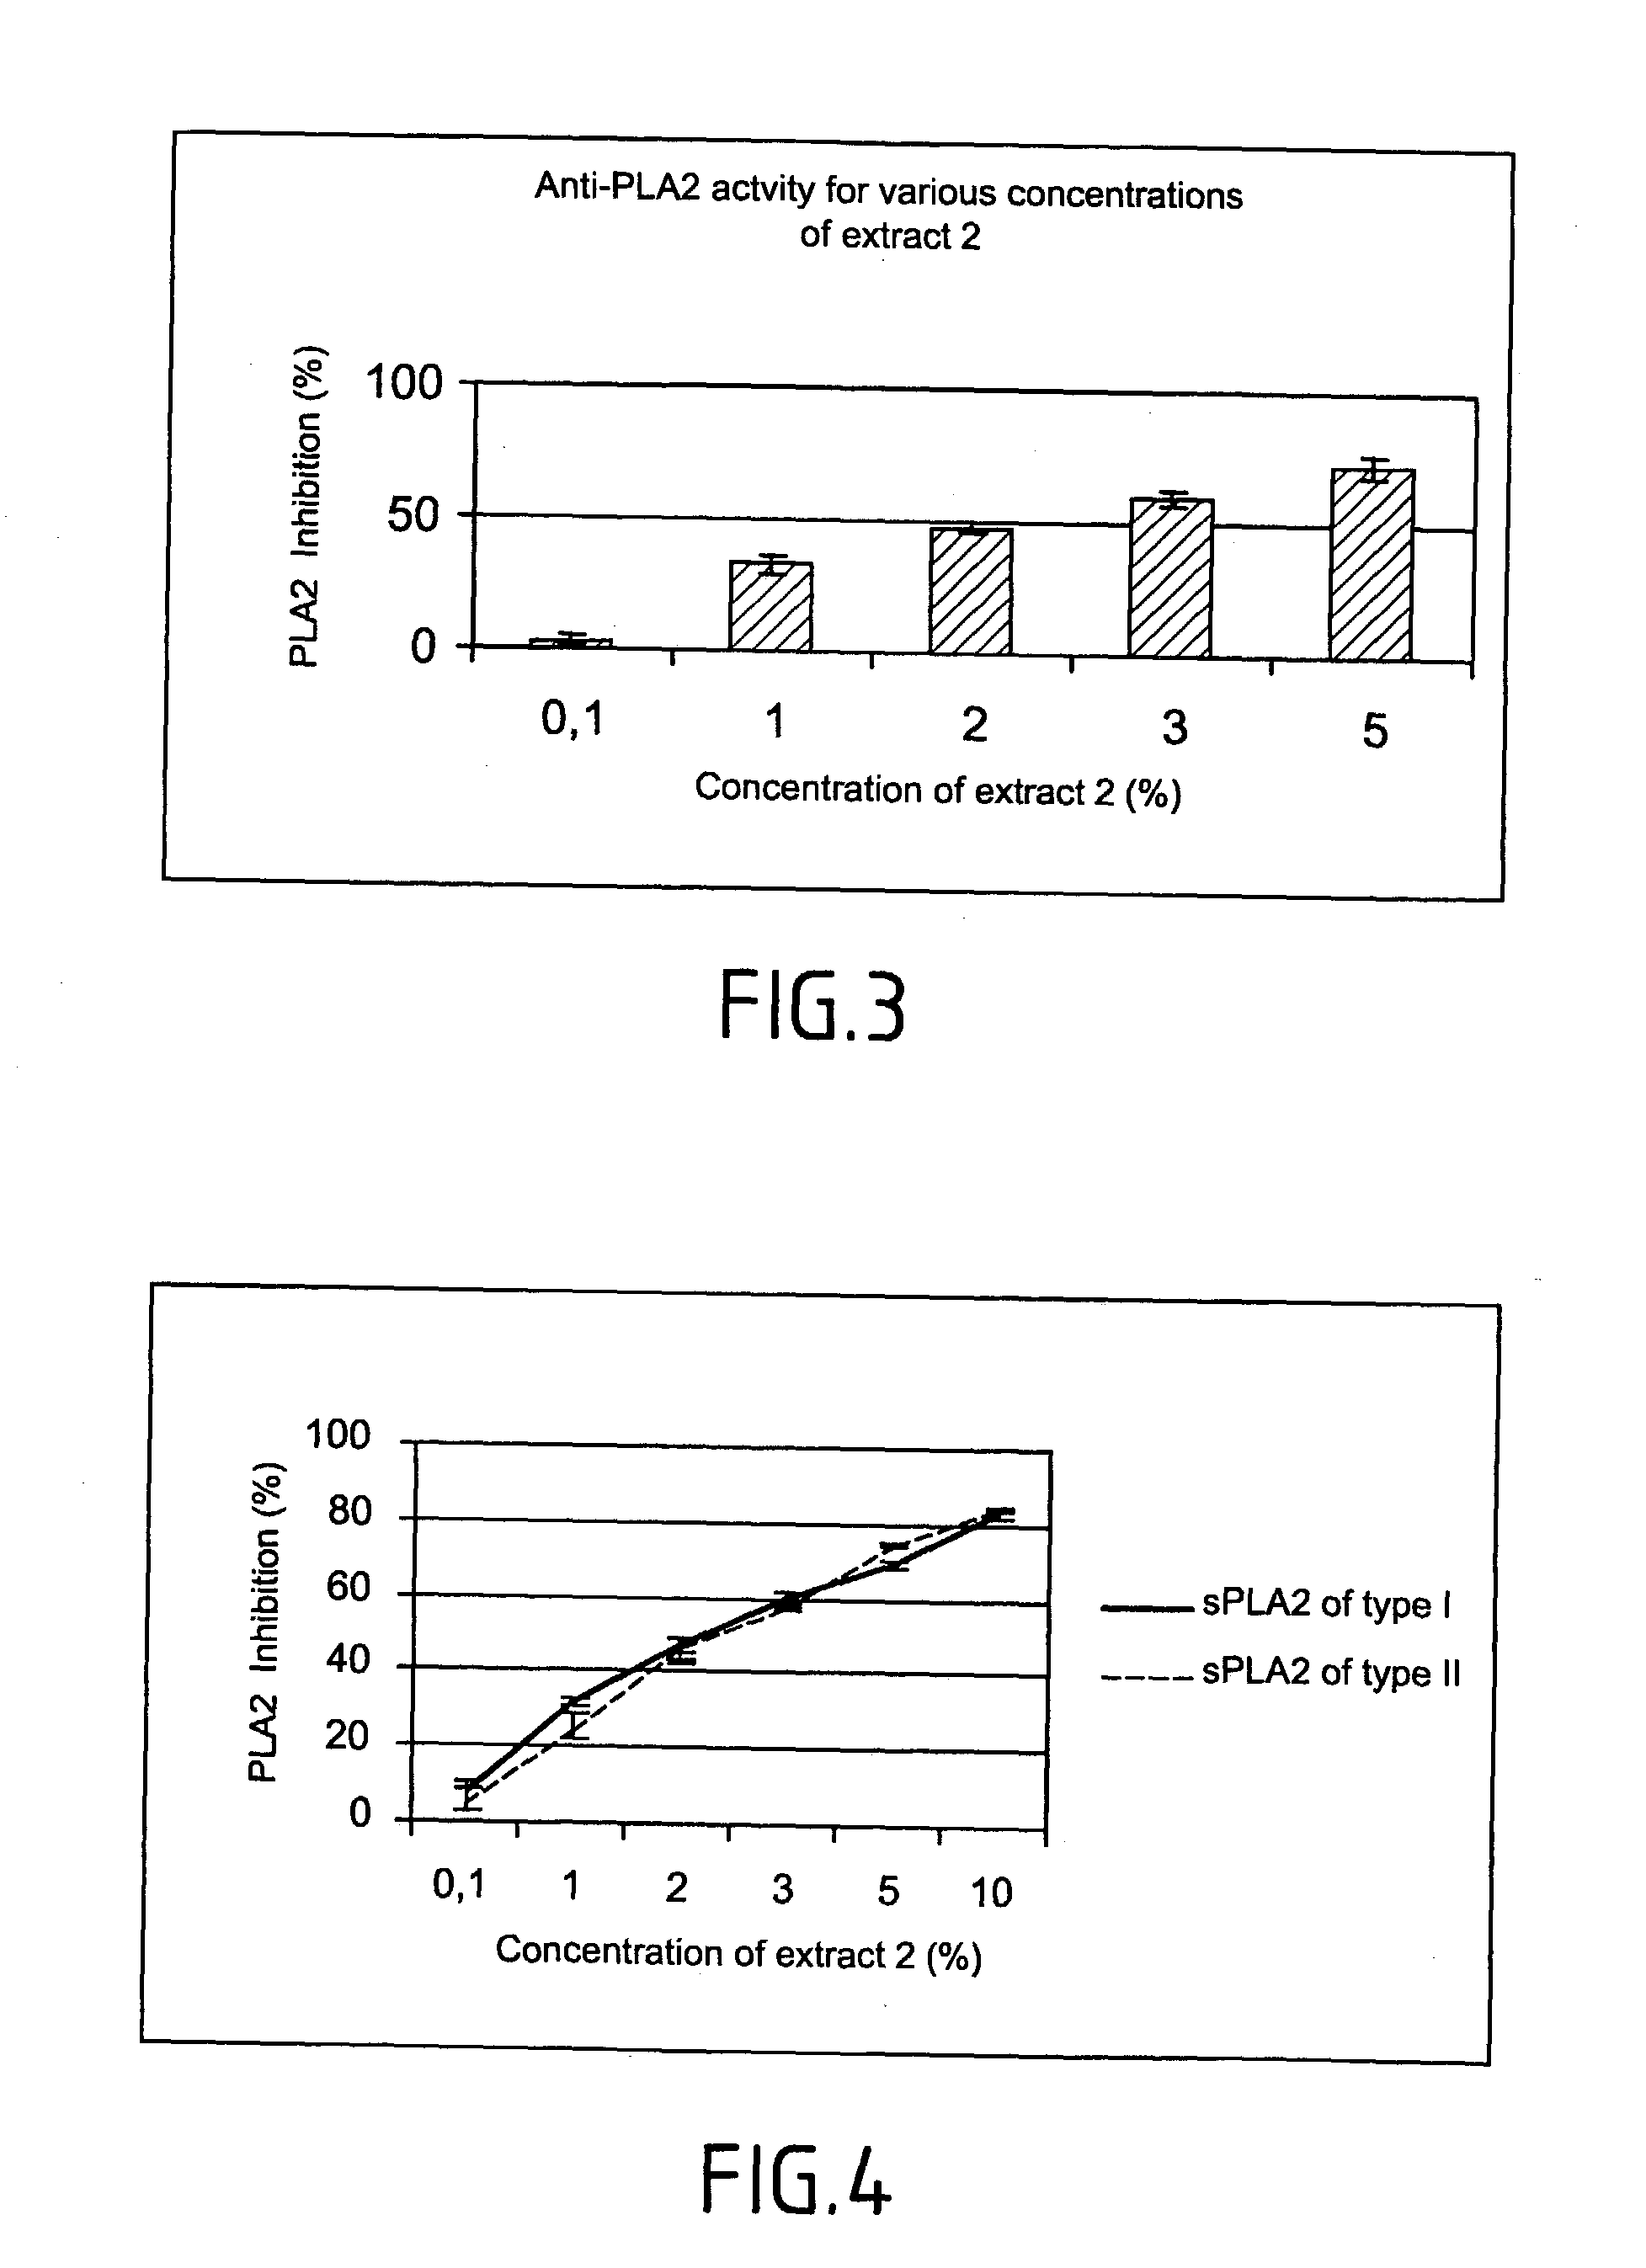 Method of testing the activity of a potentially active substance to inhibit the enzymatic activity of phospholipase A2